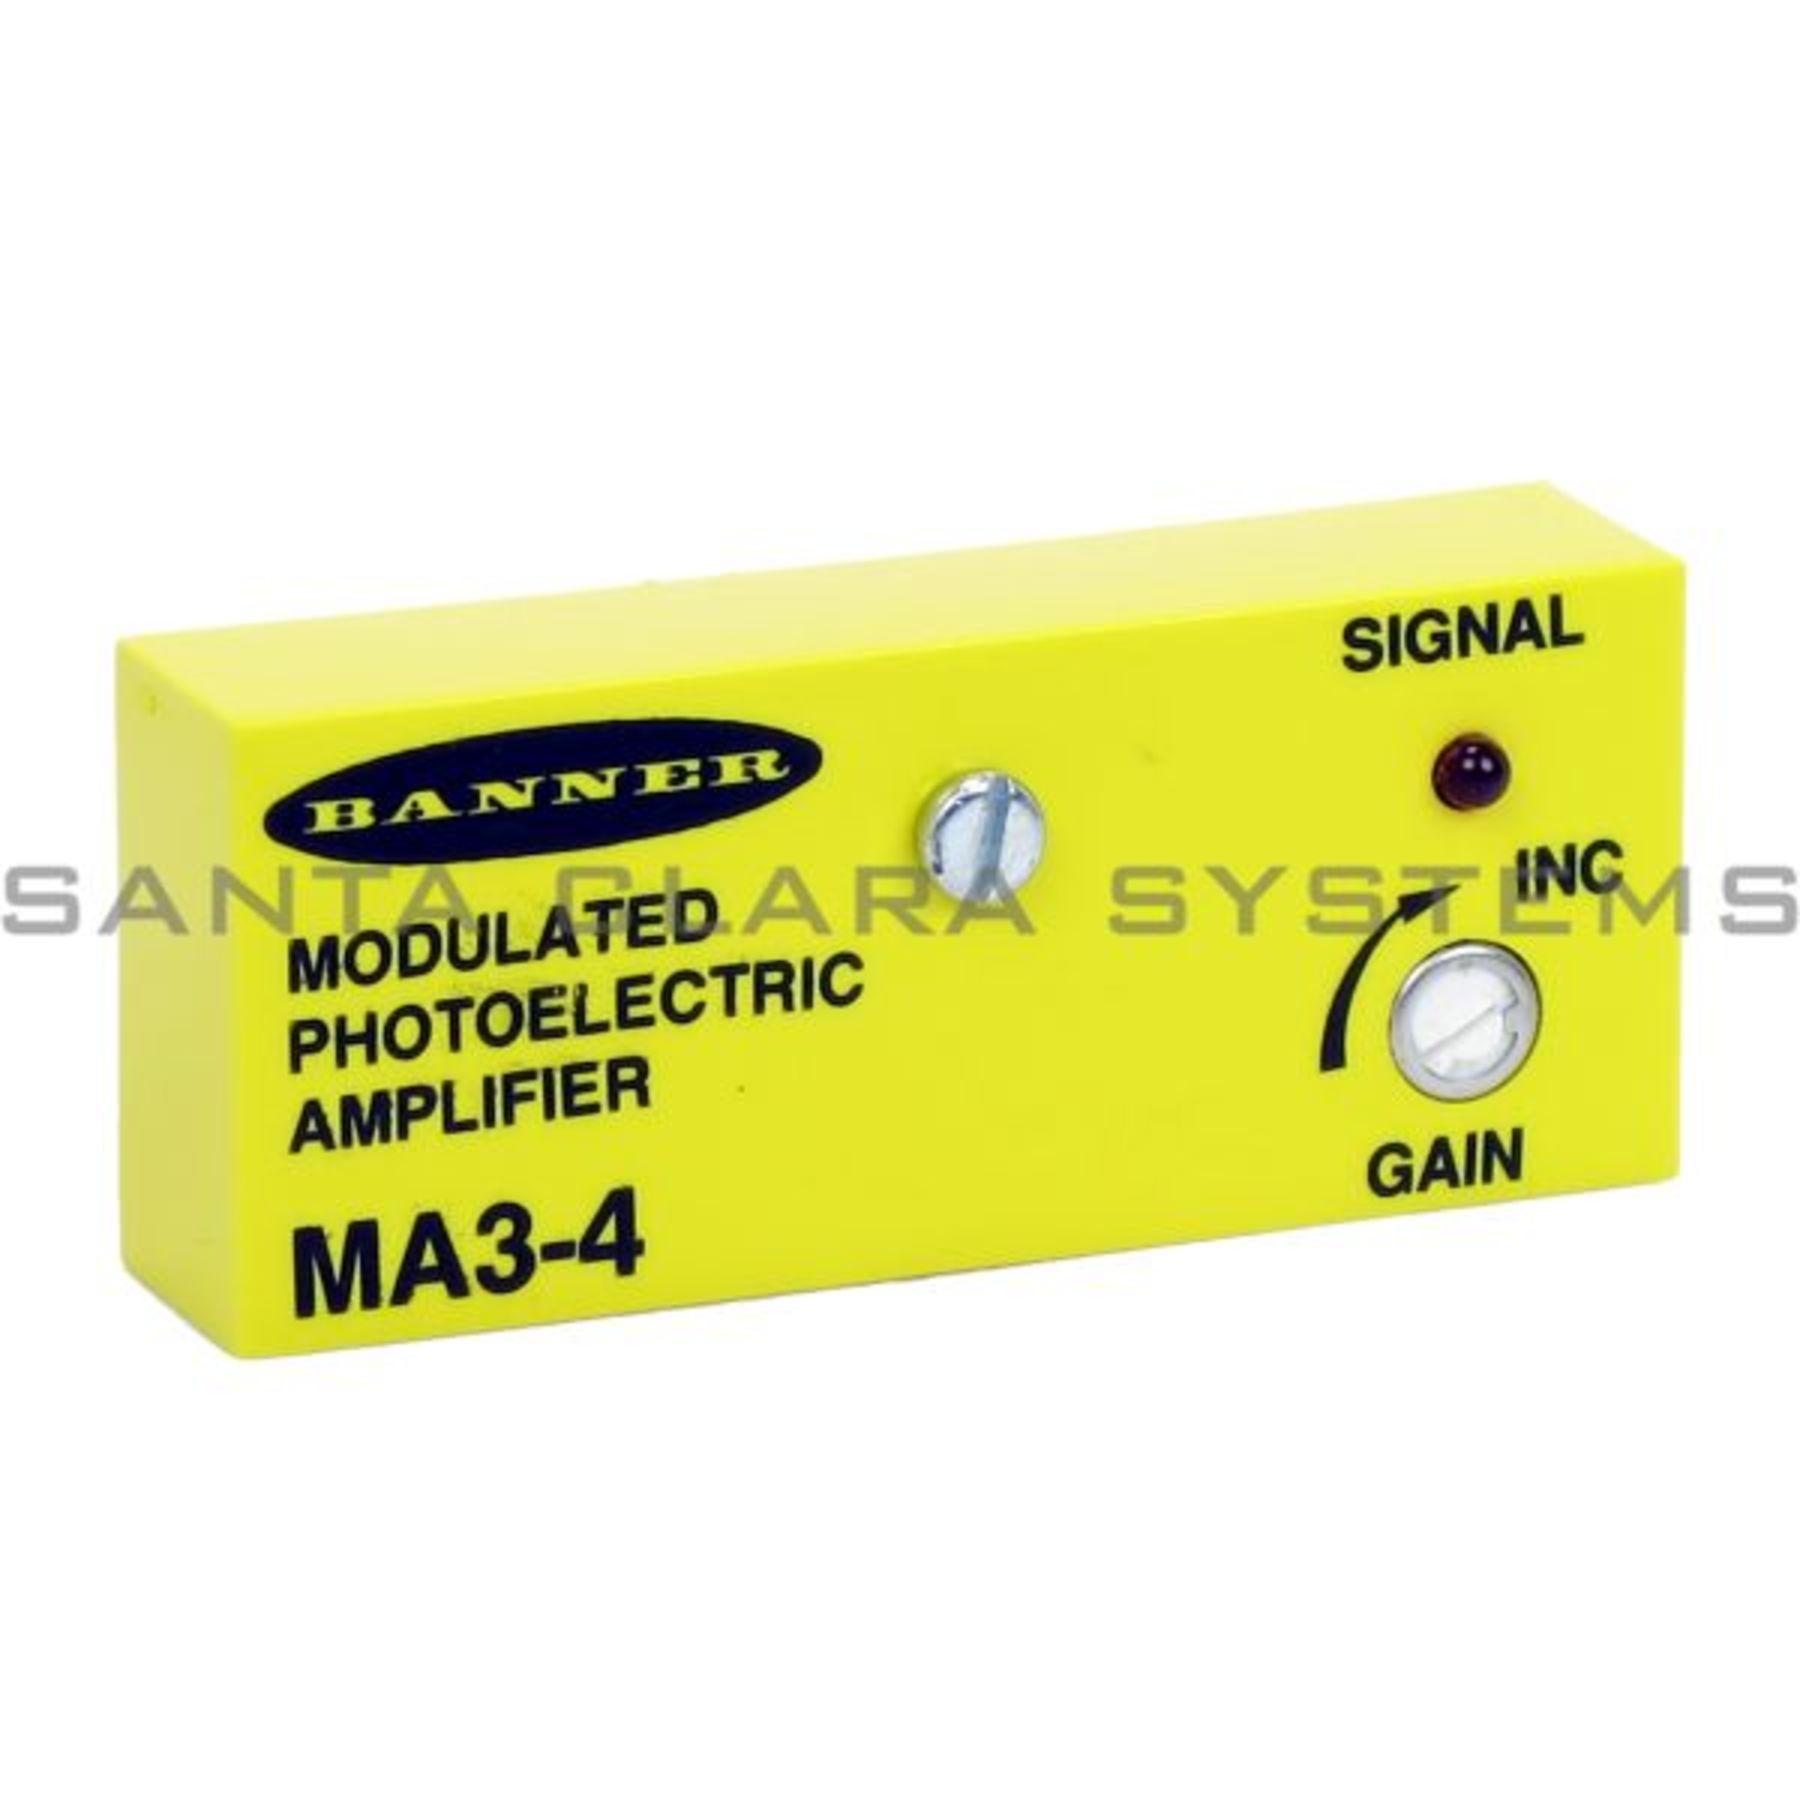 Banner MA3 Modulated Photoelectric Amplifier 10-30VDC 